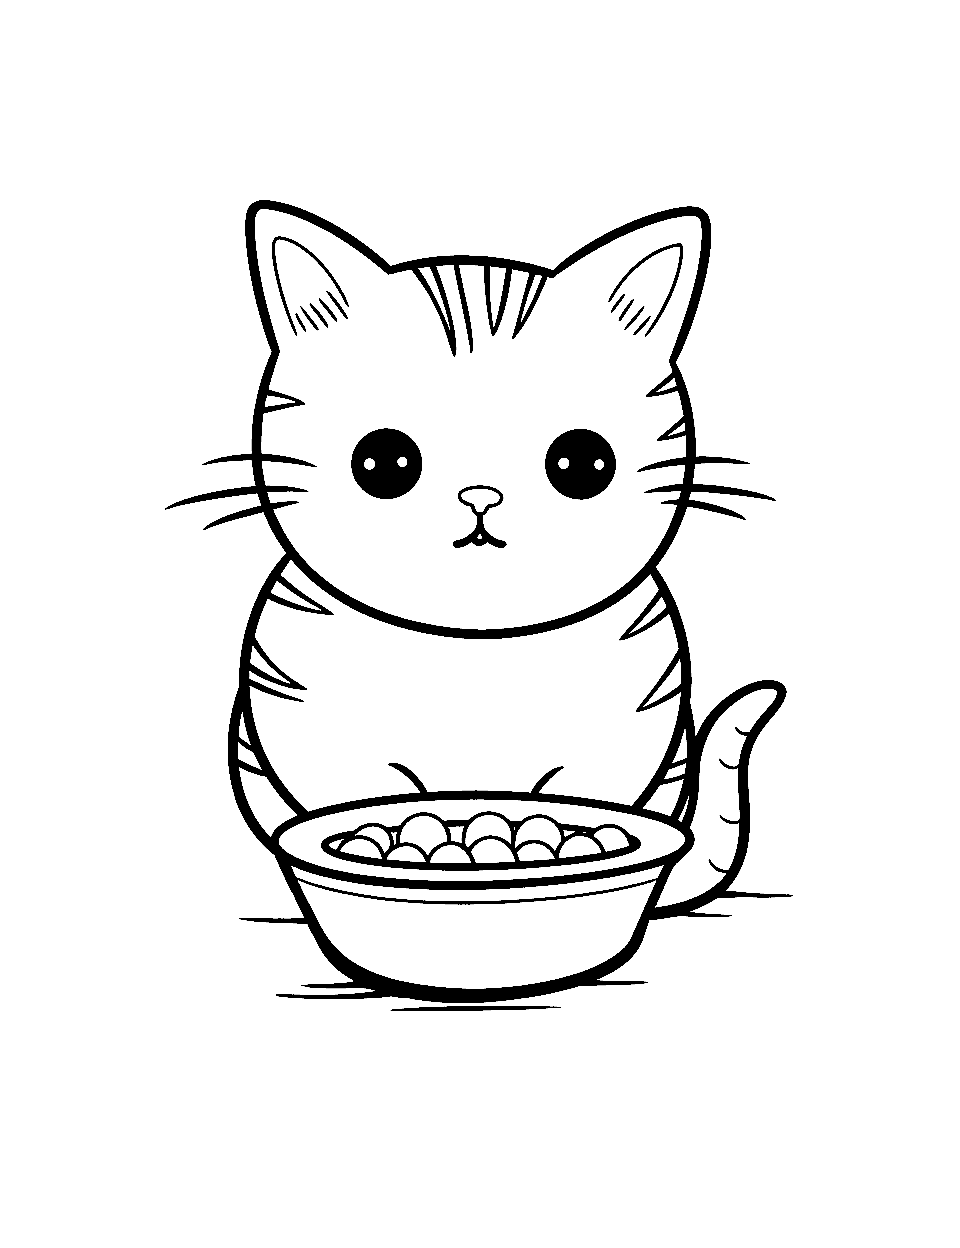 Cat's Breakfast Food Coloring Page - A cat eyeing a bowl of cereal.